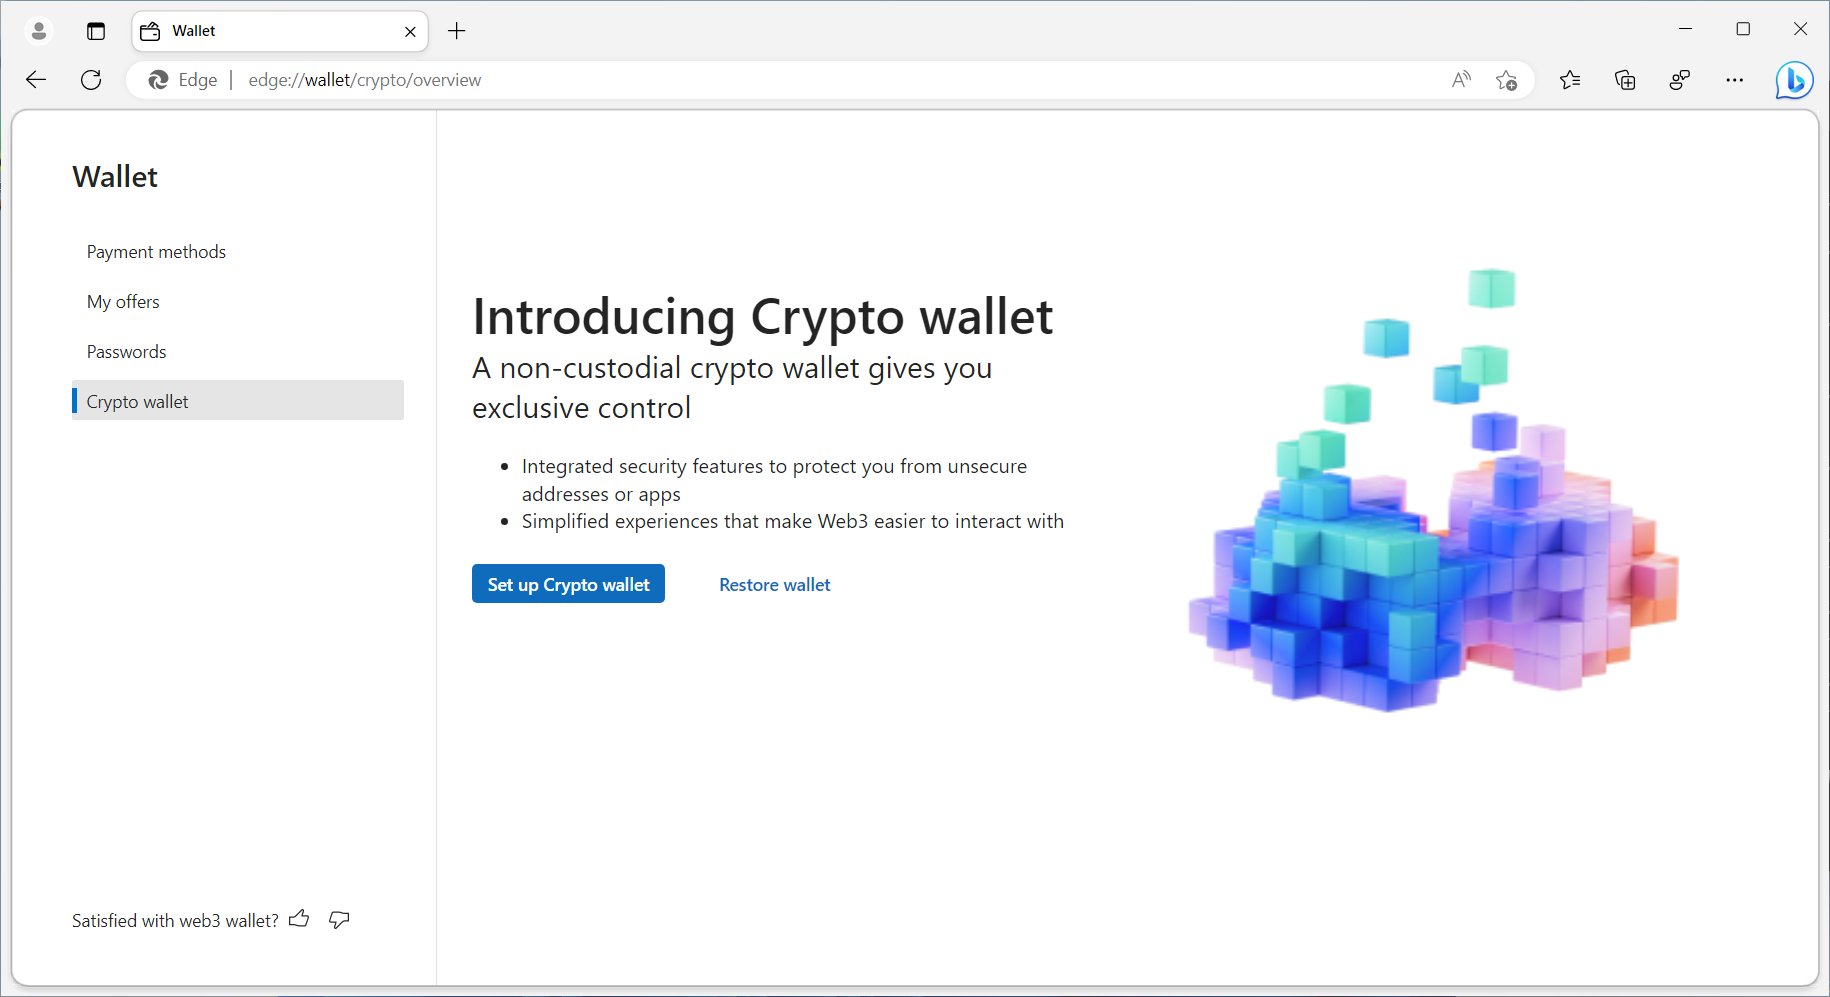 Microsoft Edge wallet overview